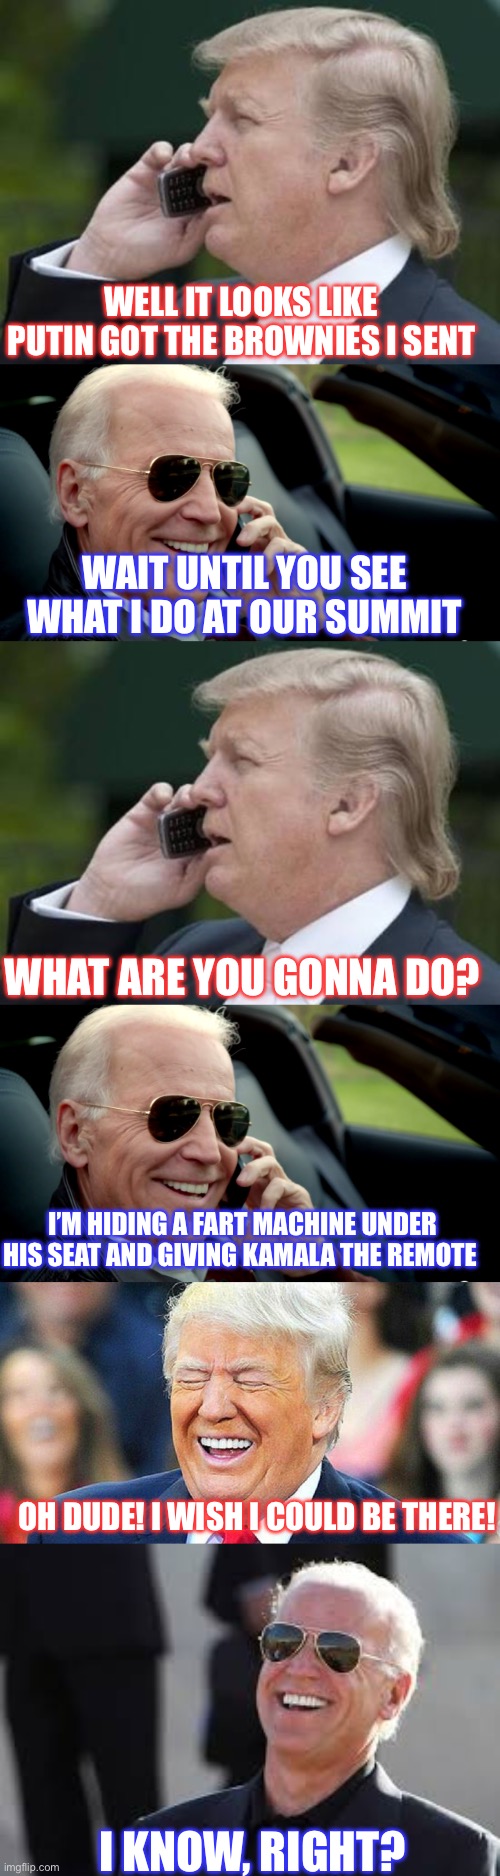 WELL IT LOOKS LIKE PUTIN GOT THE BROWNIES I SENT; WAIT UNTIL YOU SEE WHAT I DO AT OUR SUMMIT; WHAT ARE YOU GONNA DO? I’M HIDING A FART MACHINE UNDER HIS SEAT AND GIVING KAMALA THE REMOTE; OH DUDE! I WISH I COULD BE THERE! I KNOW, RIGHT? | image tagged in trump phone,biden sunglasses phone,donald trump laughing,biden laughing | made w/ Imgflip meme maker